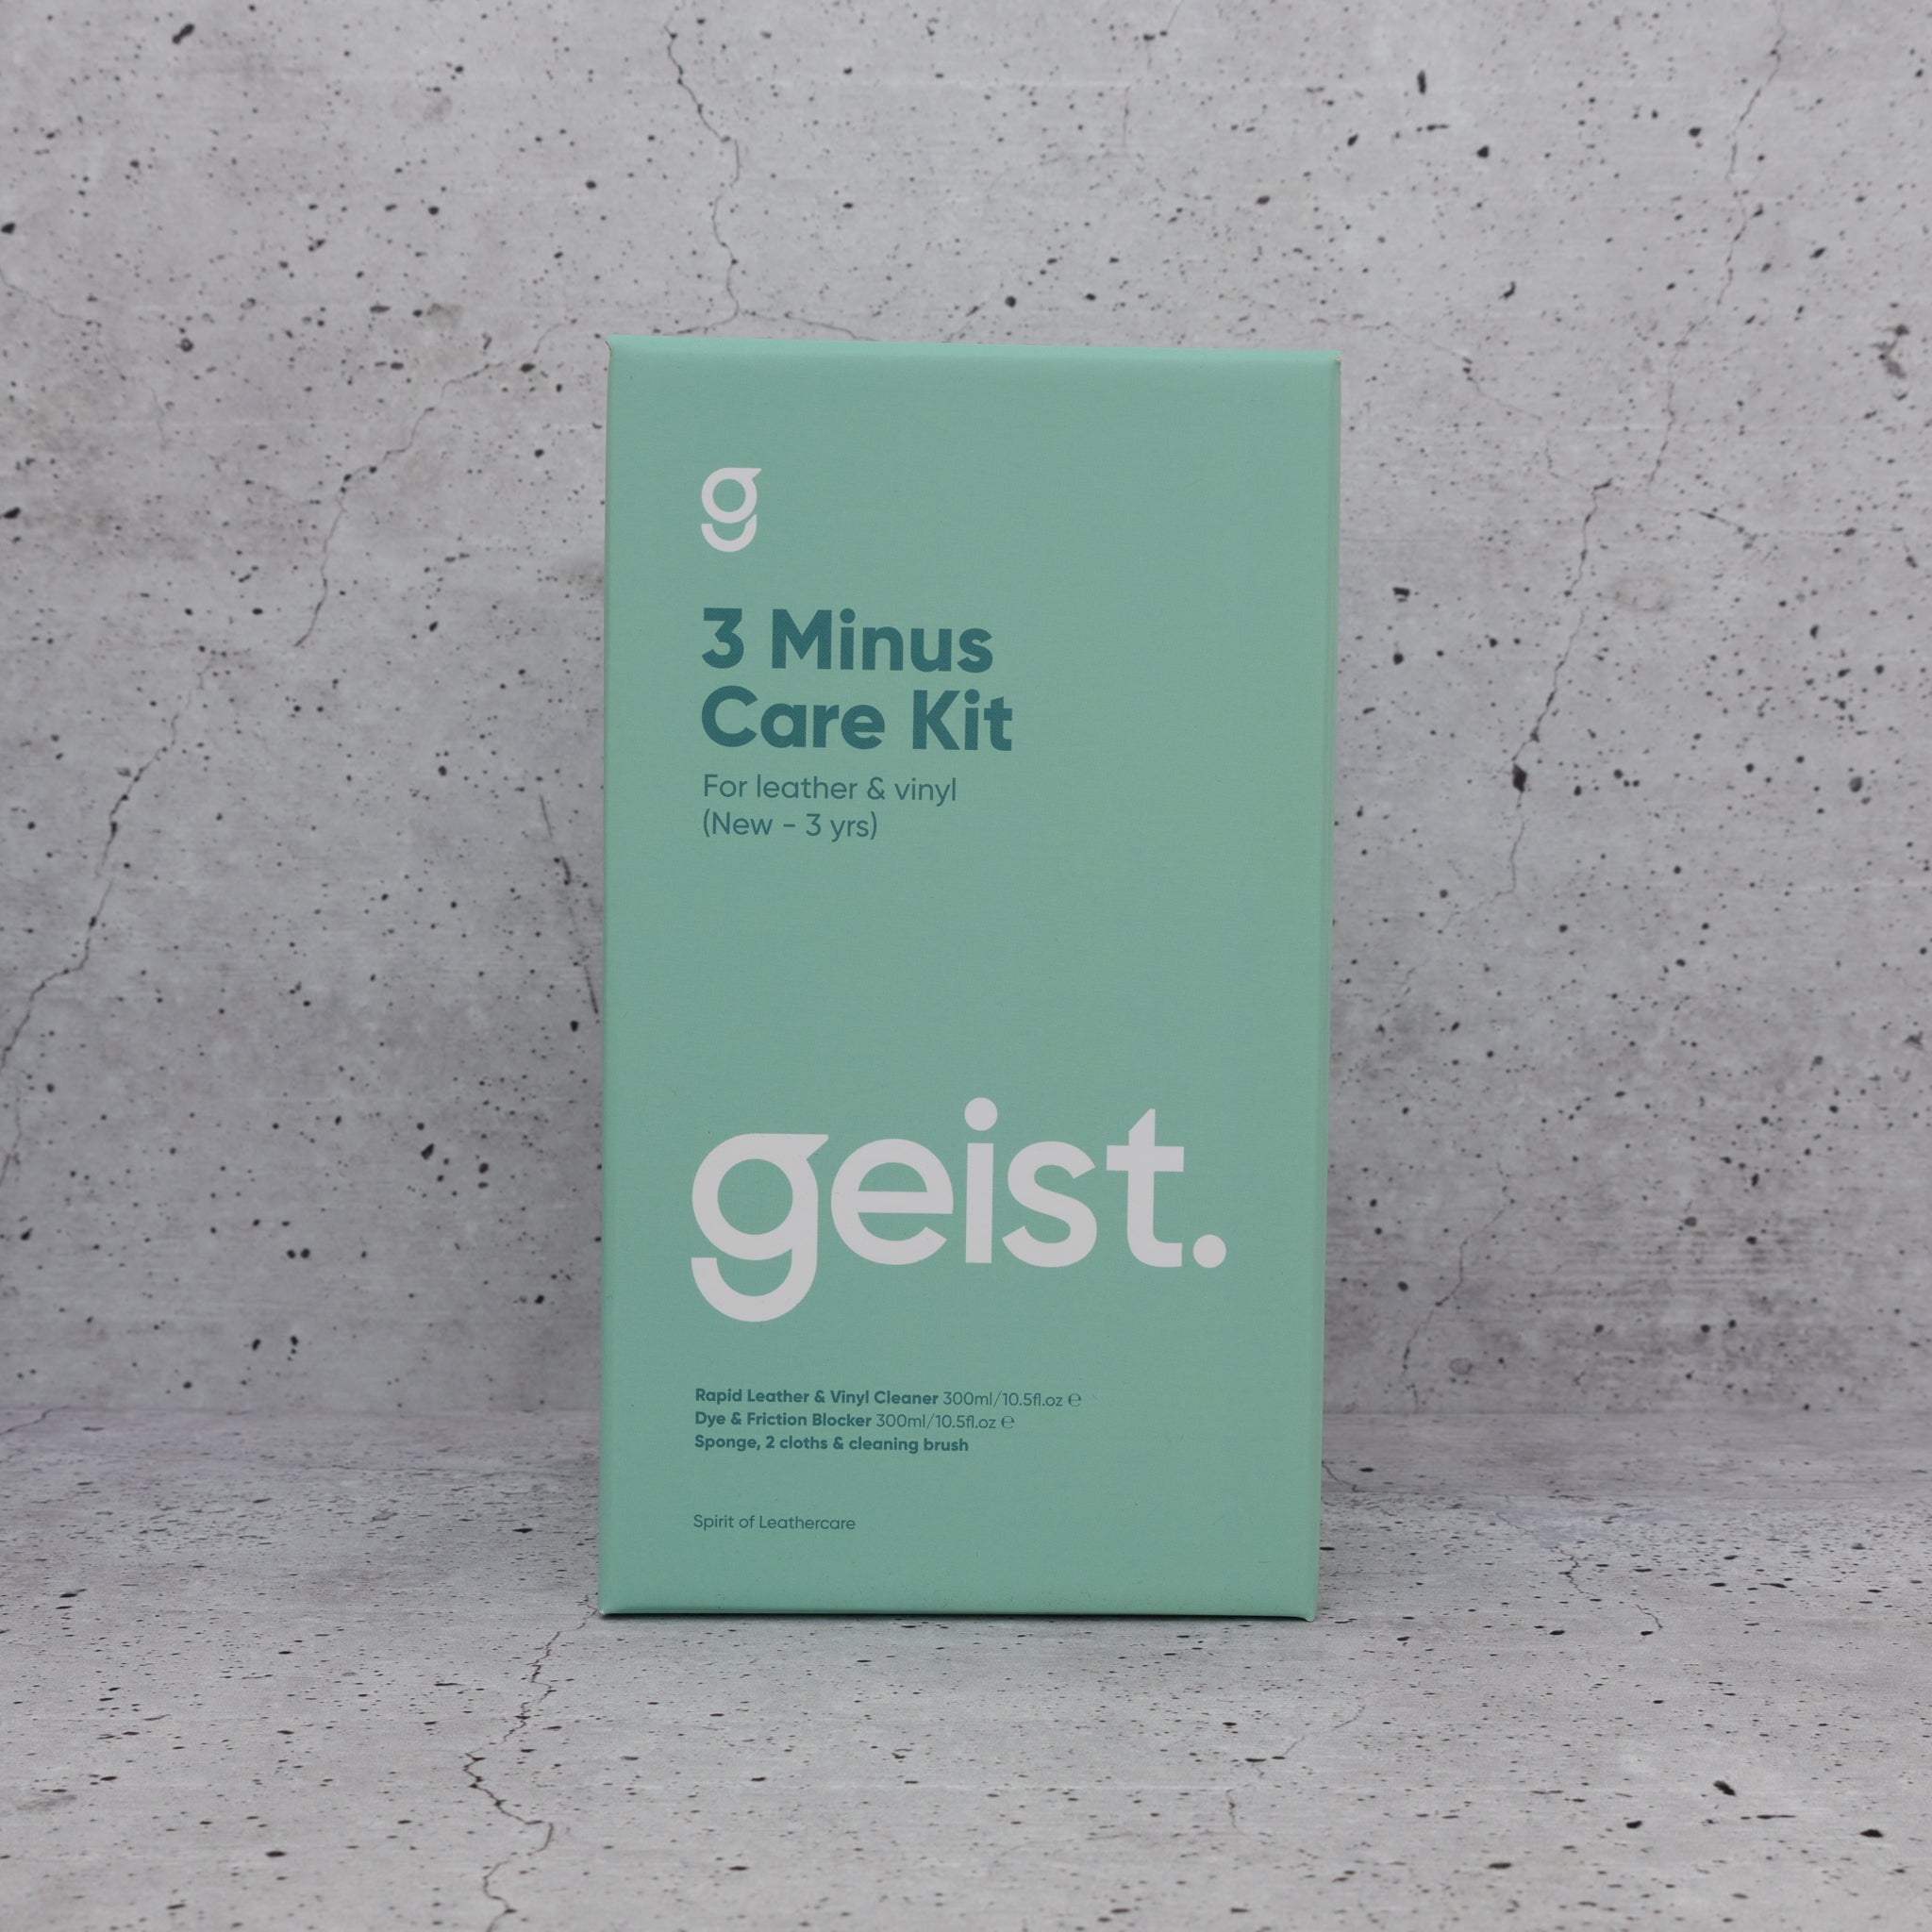 Geist. 3 Minus Care Kit for Leather and Vinyl, For Interiors Less Than 3  Years Old